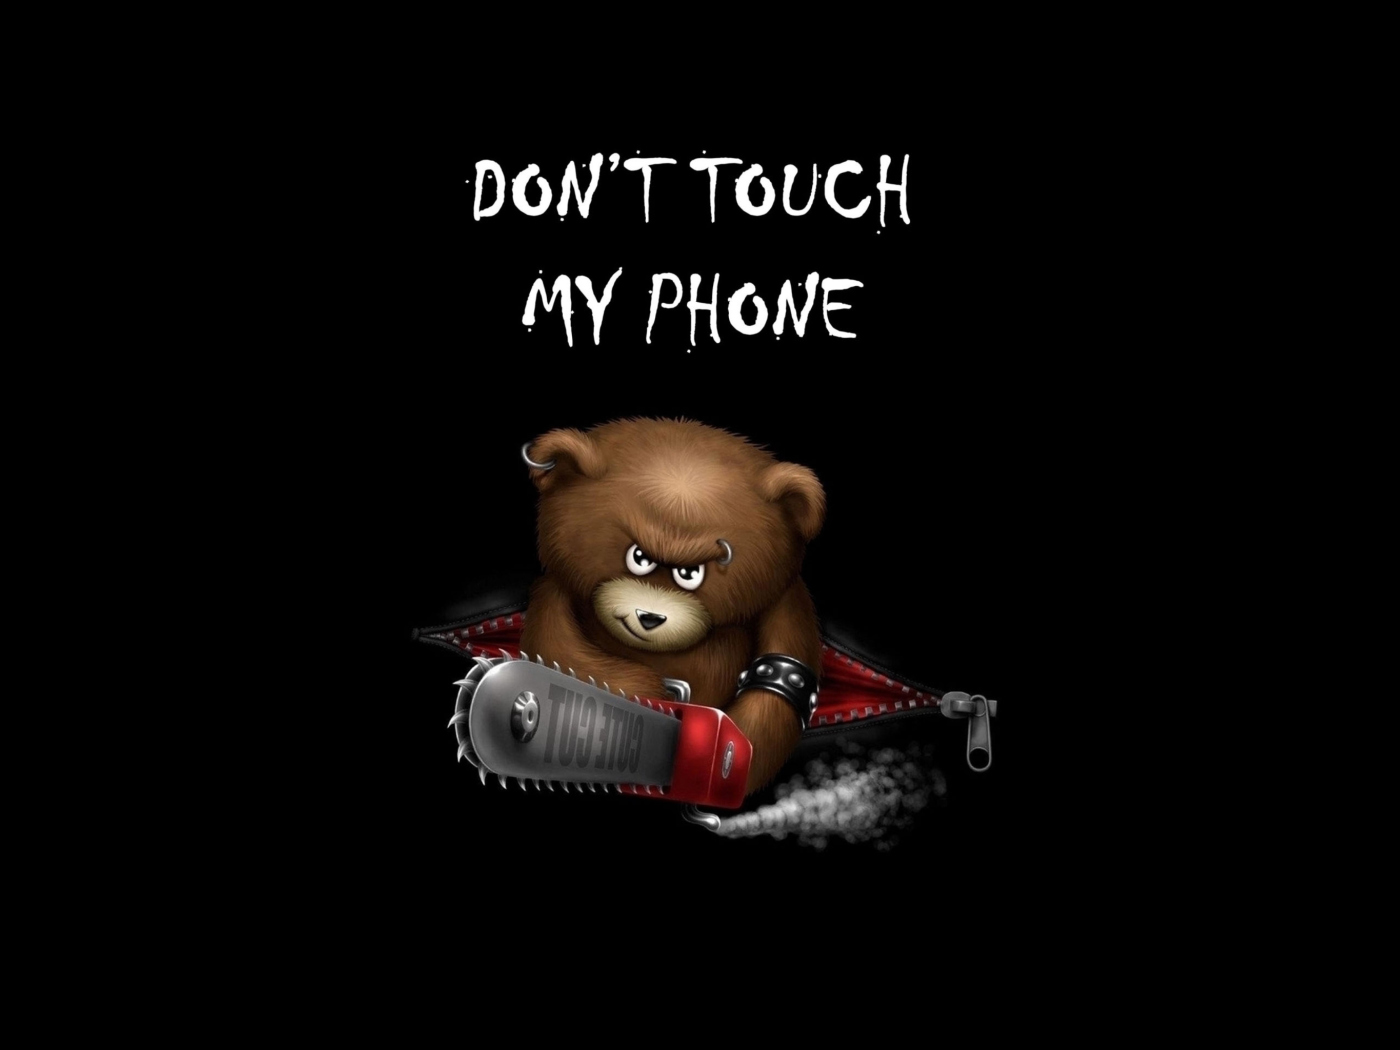 Обои Dont Touch My Phone 1400x1050